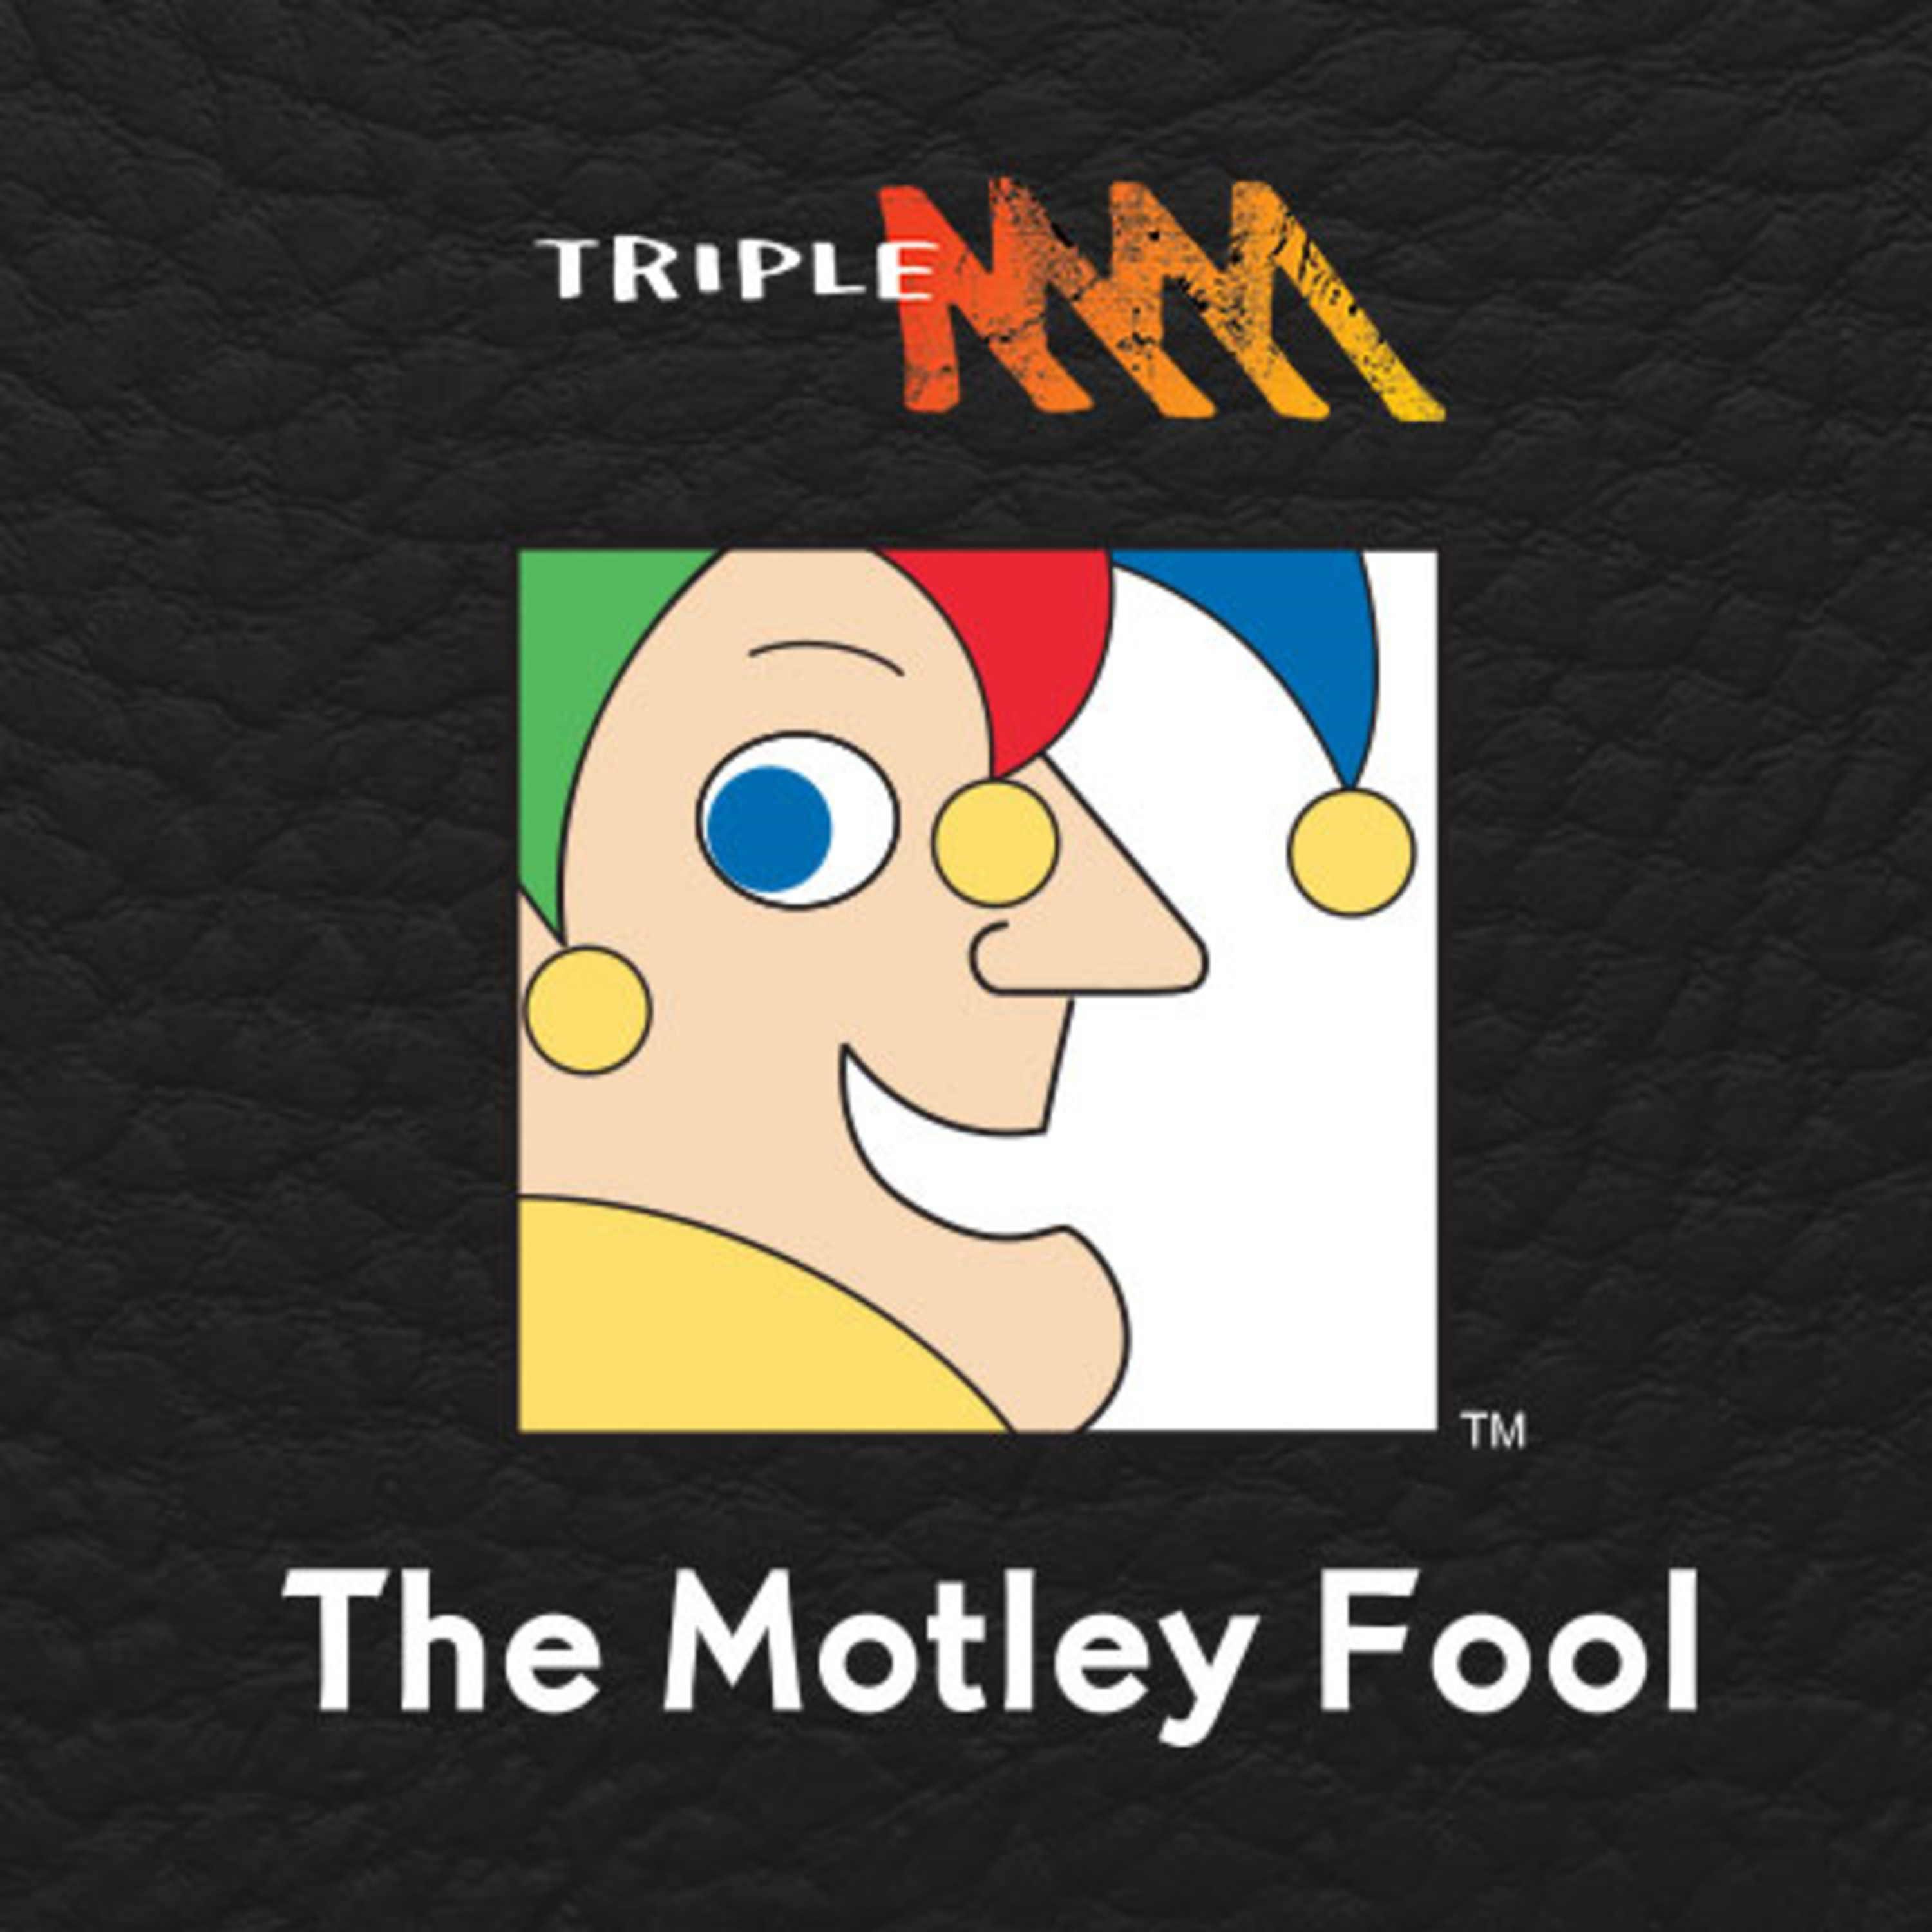 Tesla's Electric Results, Myer Misleads, Property's Back! or is it - Episode 192 October 25 - Triple M's Motley Fool Money